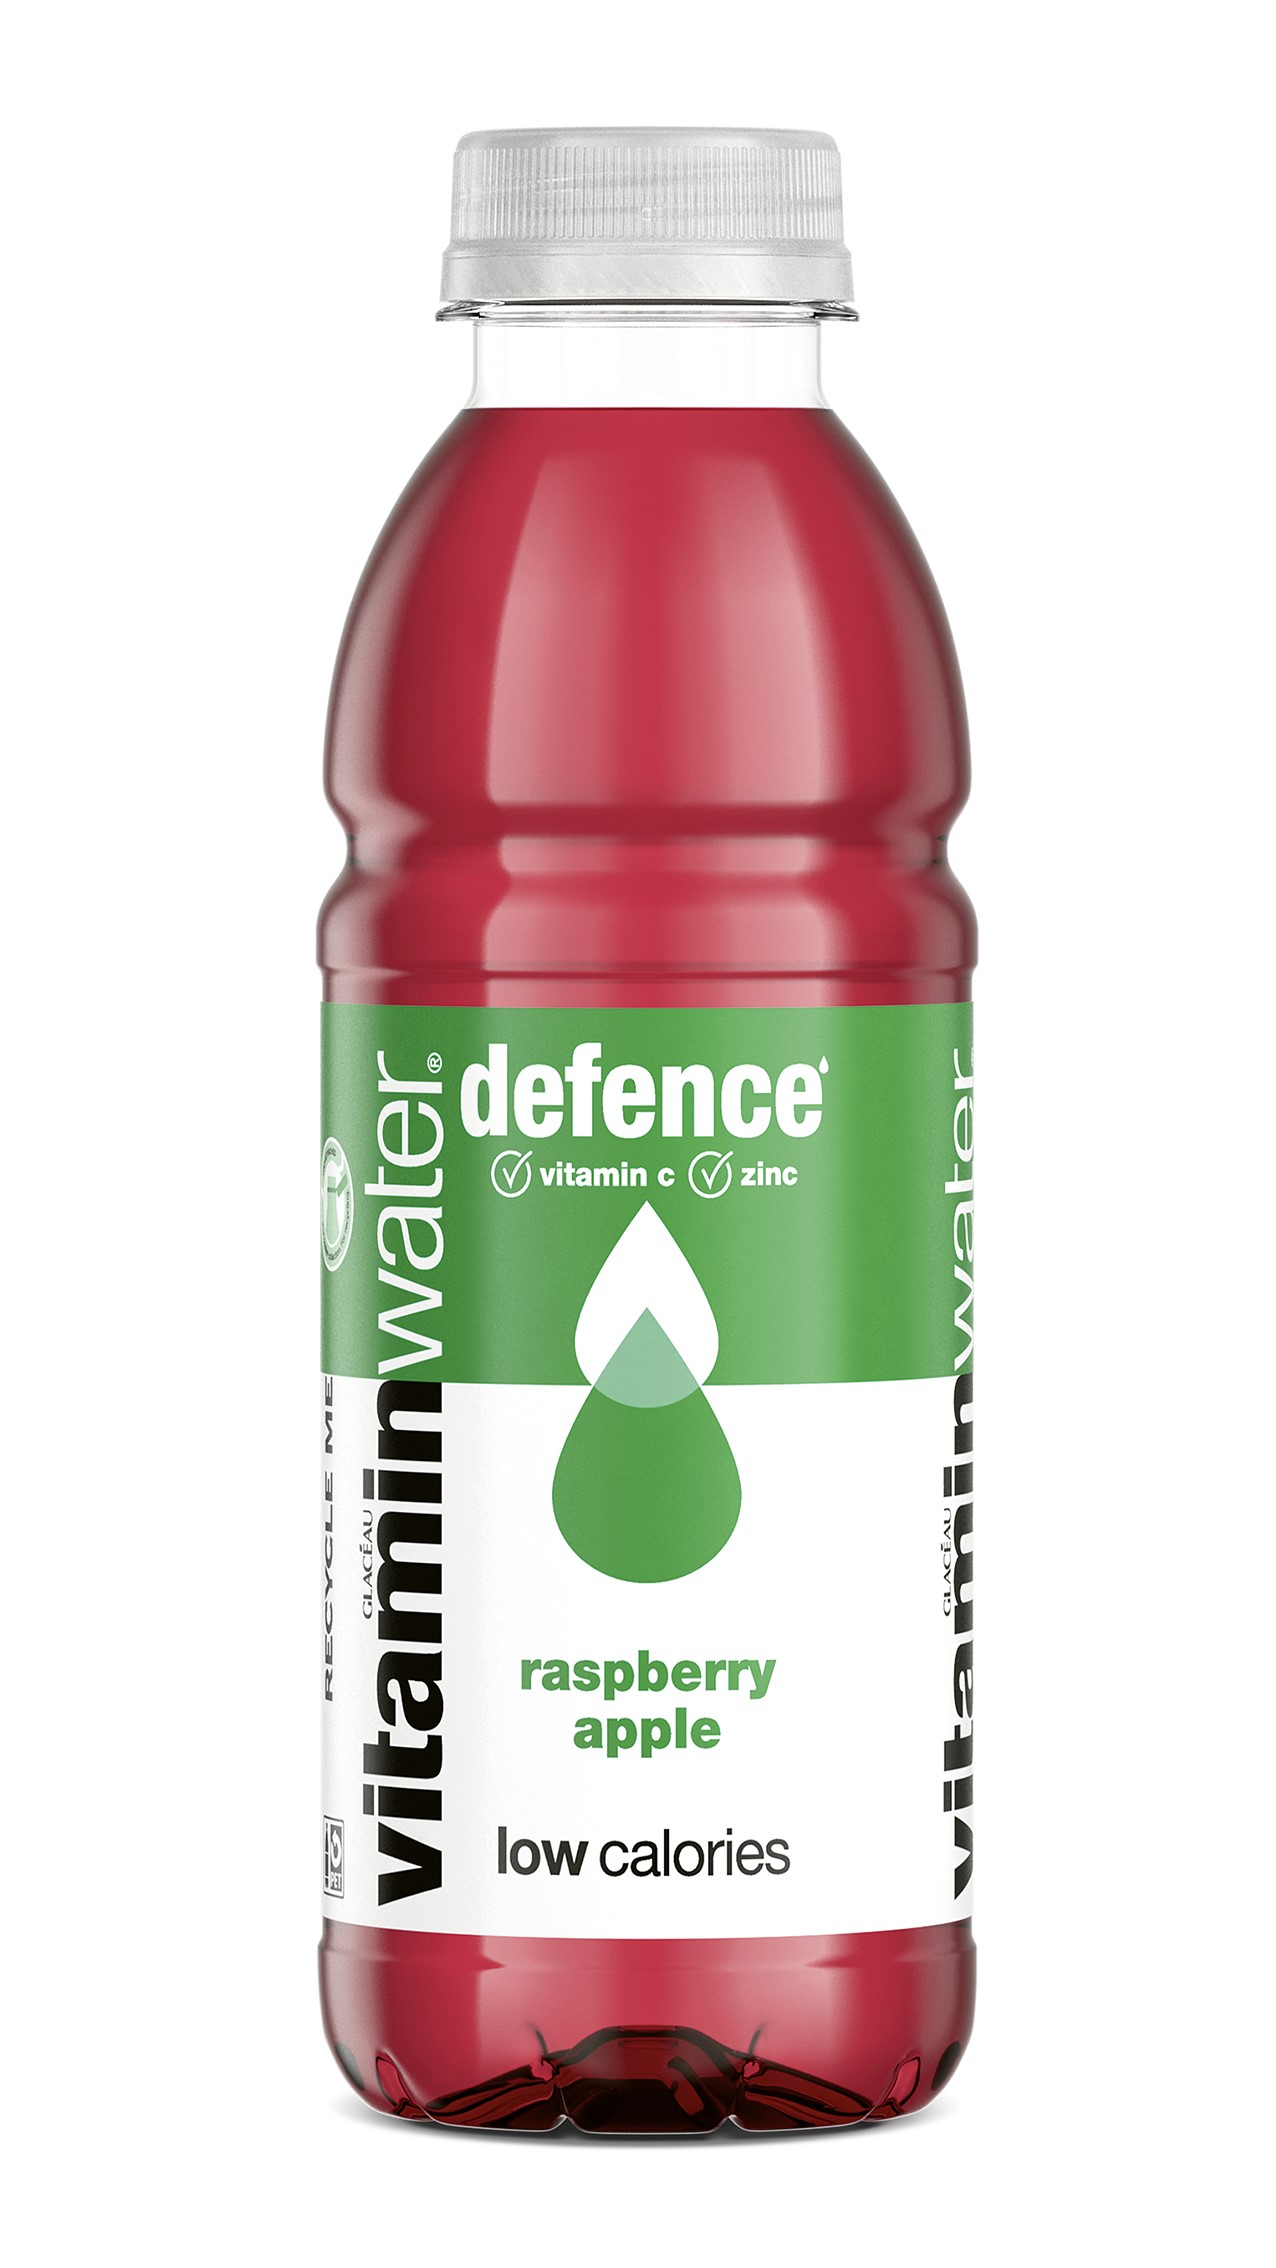 bouteille de vitaminwater defence